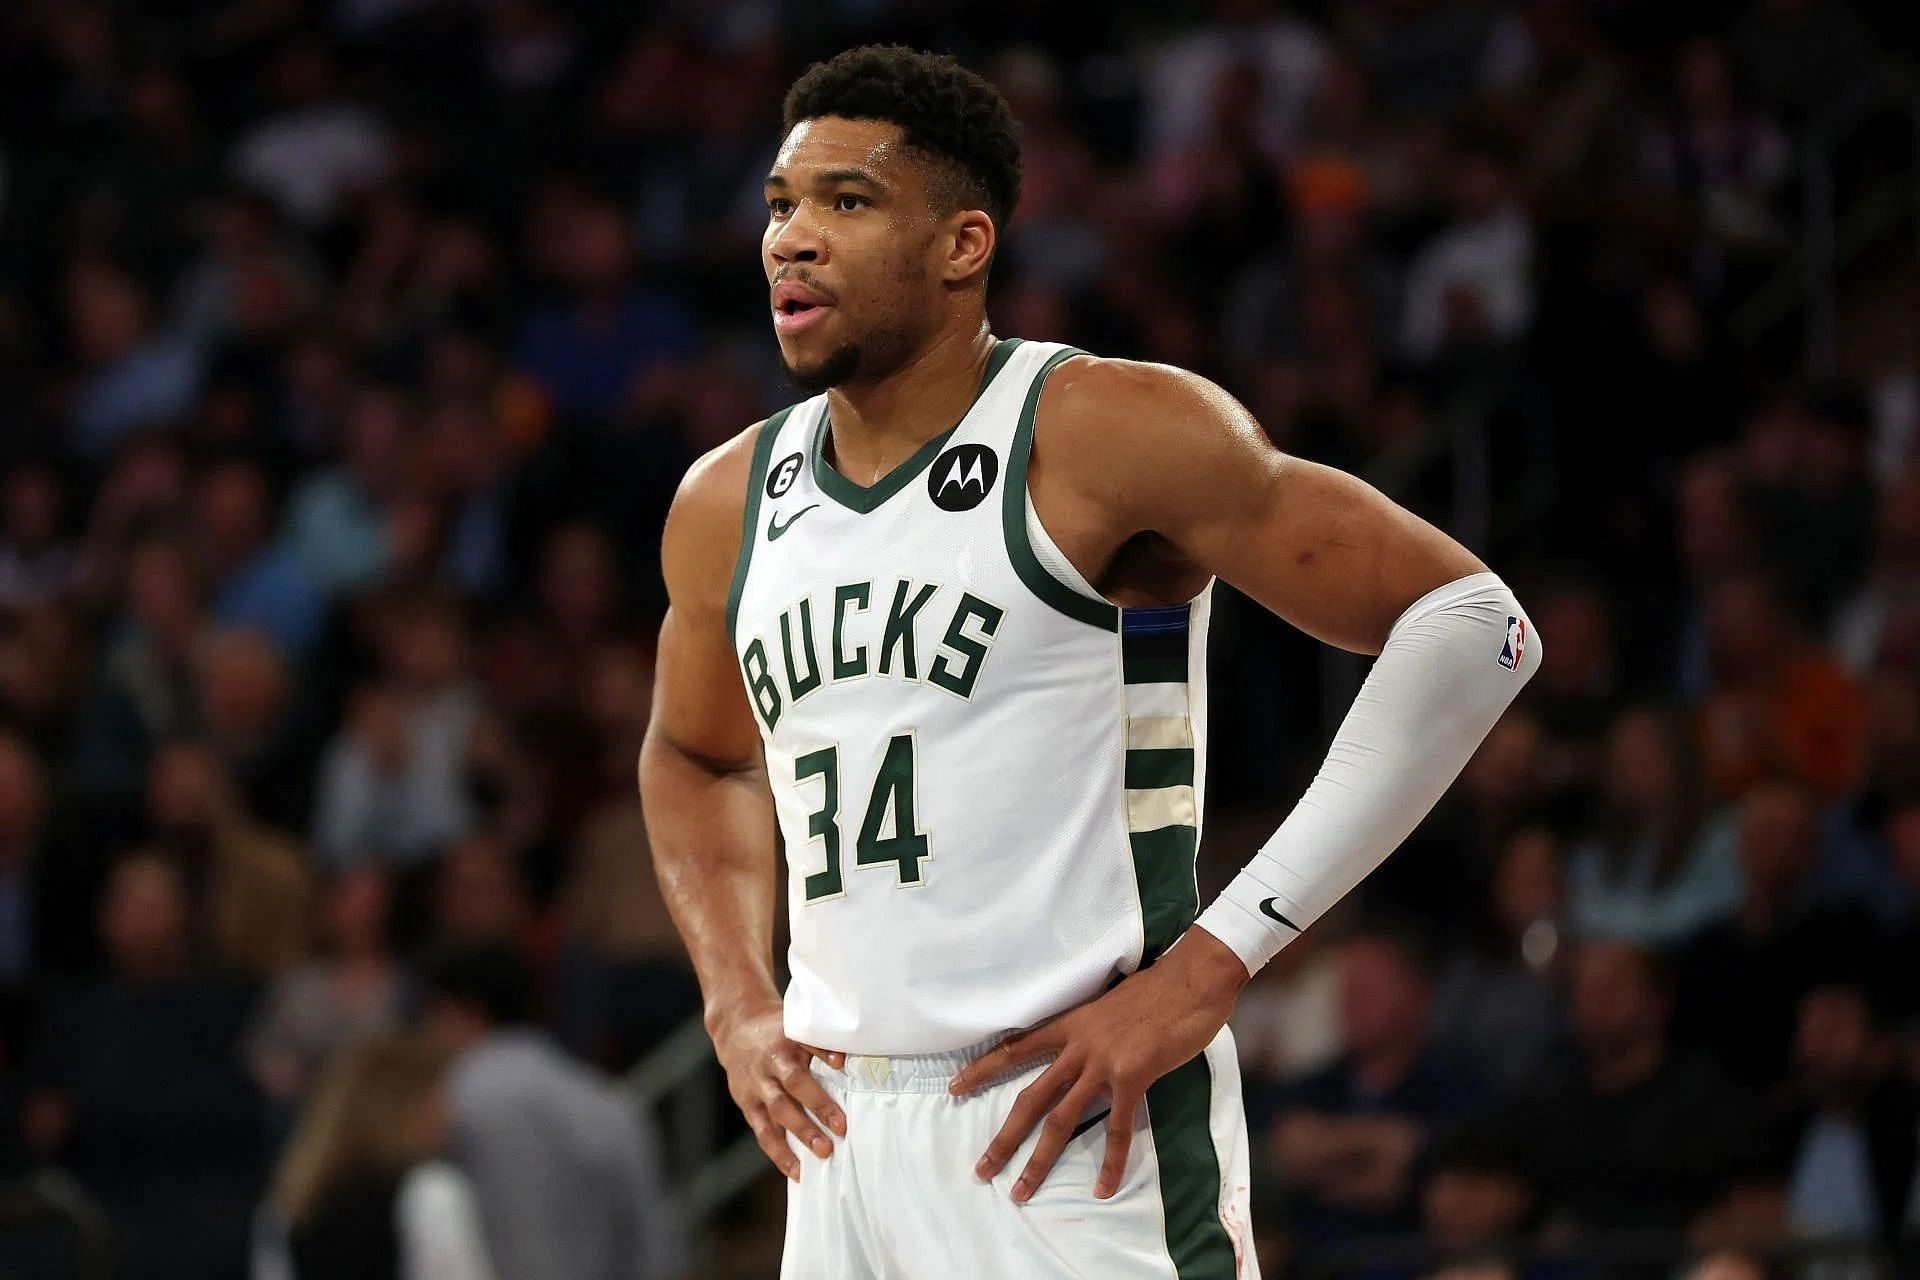 Giannis Antetokounmpo is listed as probable in the Milwaukee Bucks